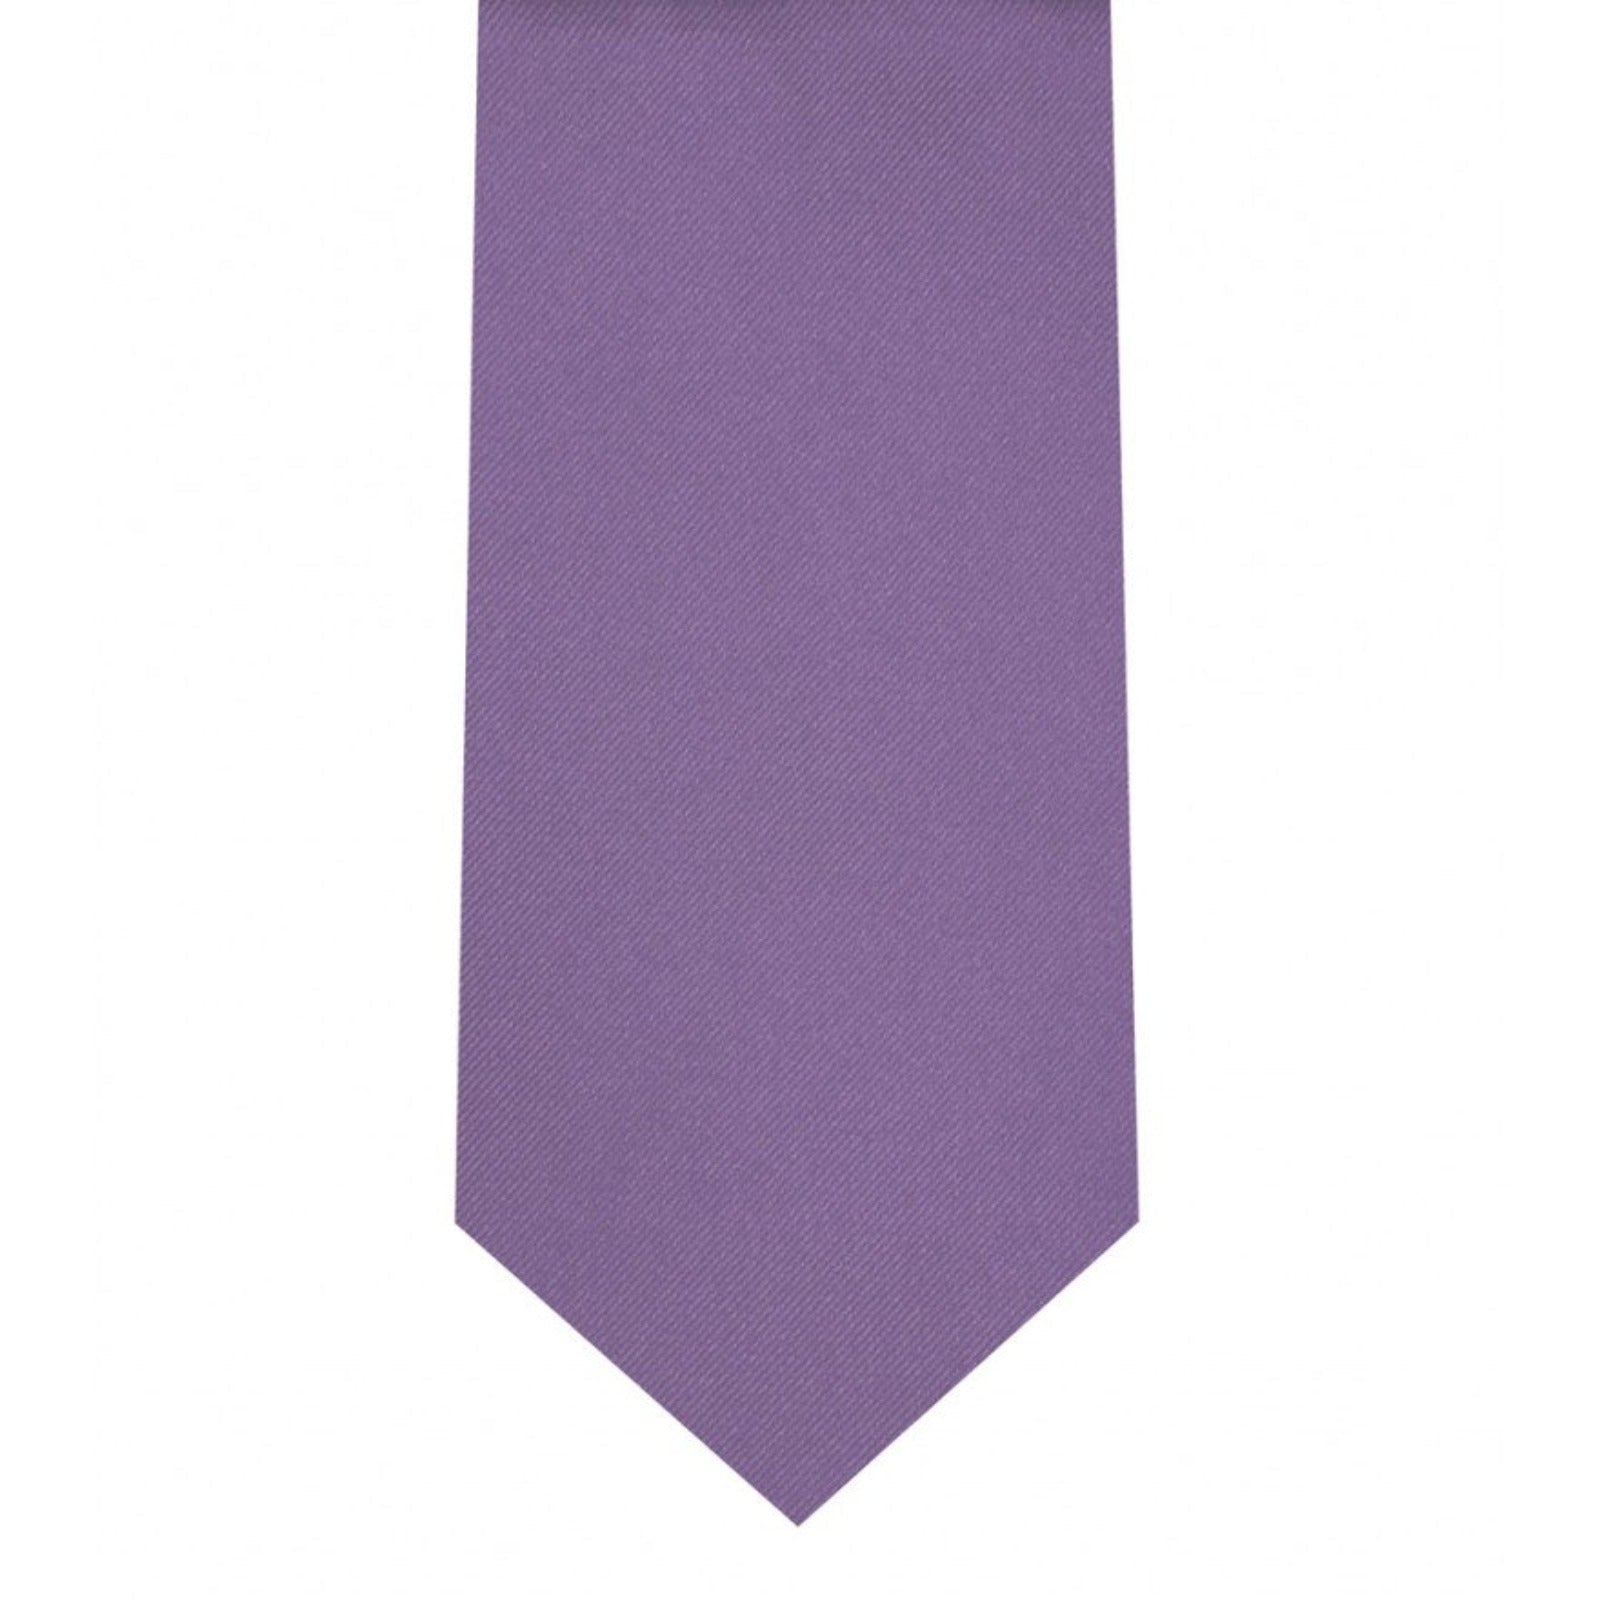 Classic Pastel Purple Tie Skinny width 2.75 inches With Matching Pocket Square | KCT Menswear